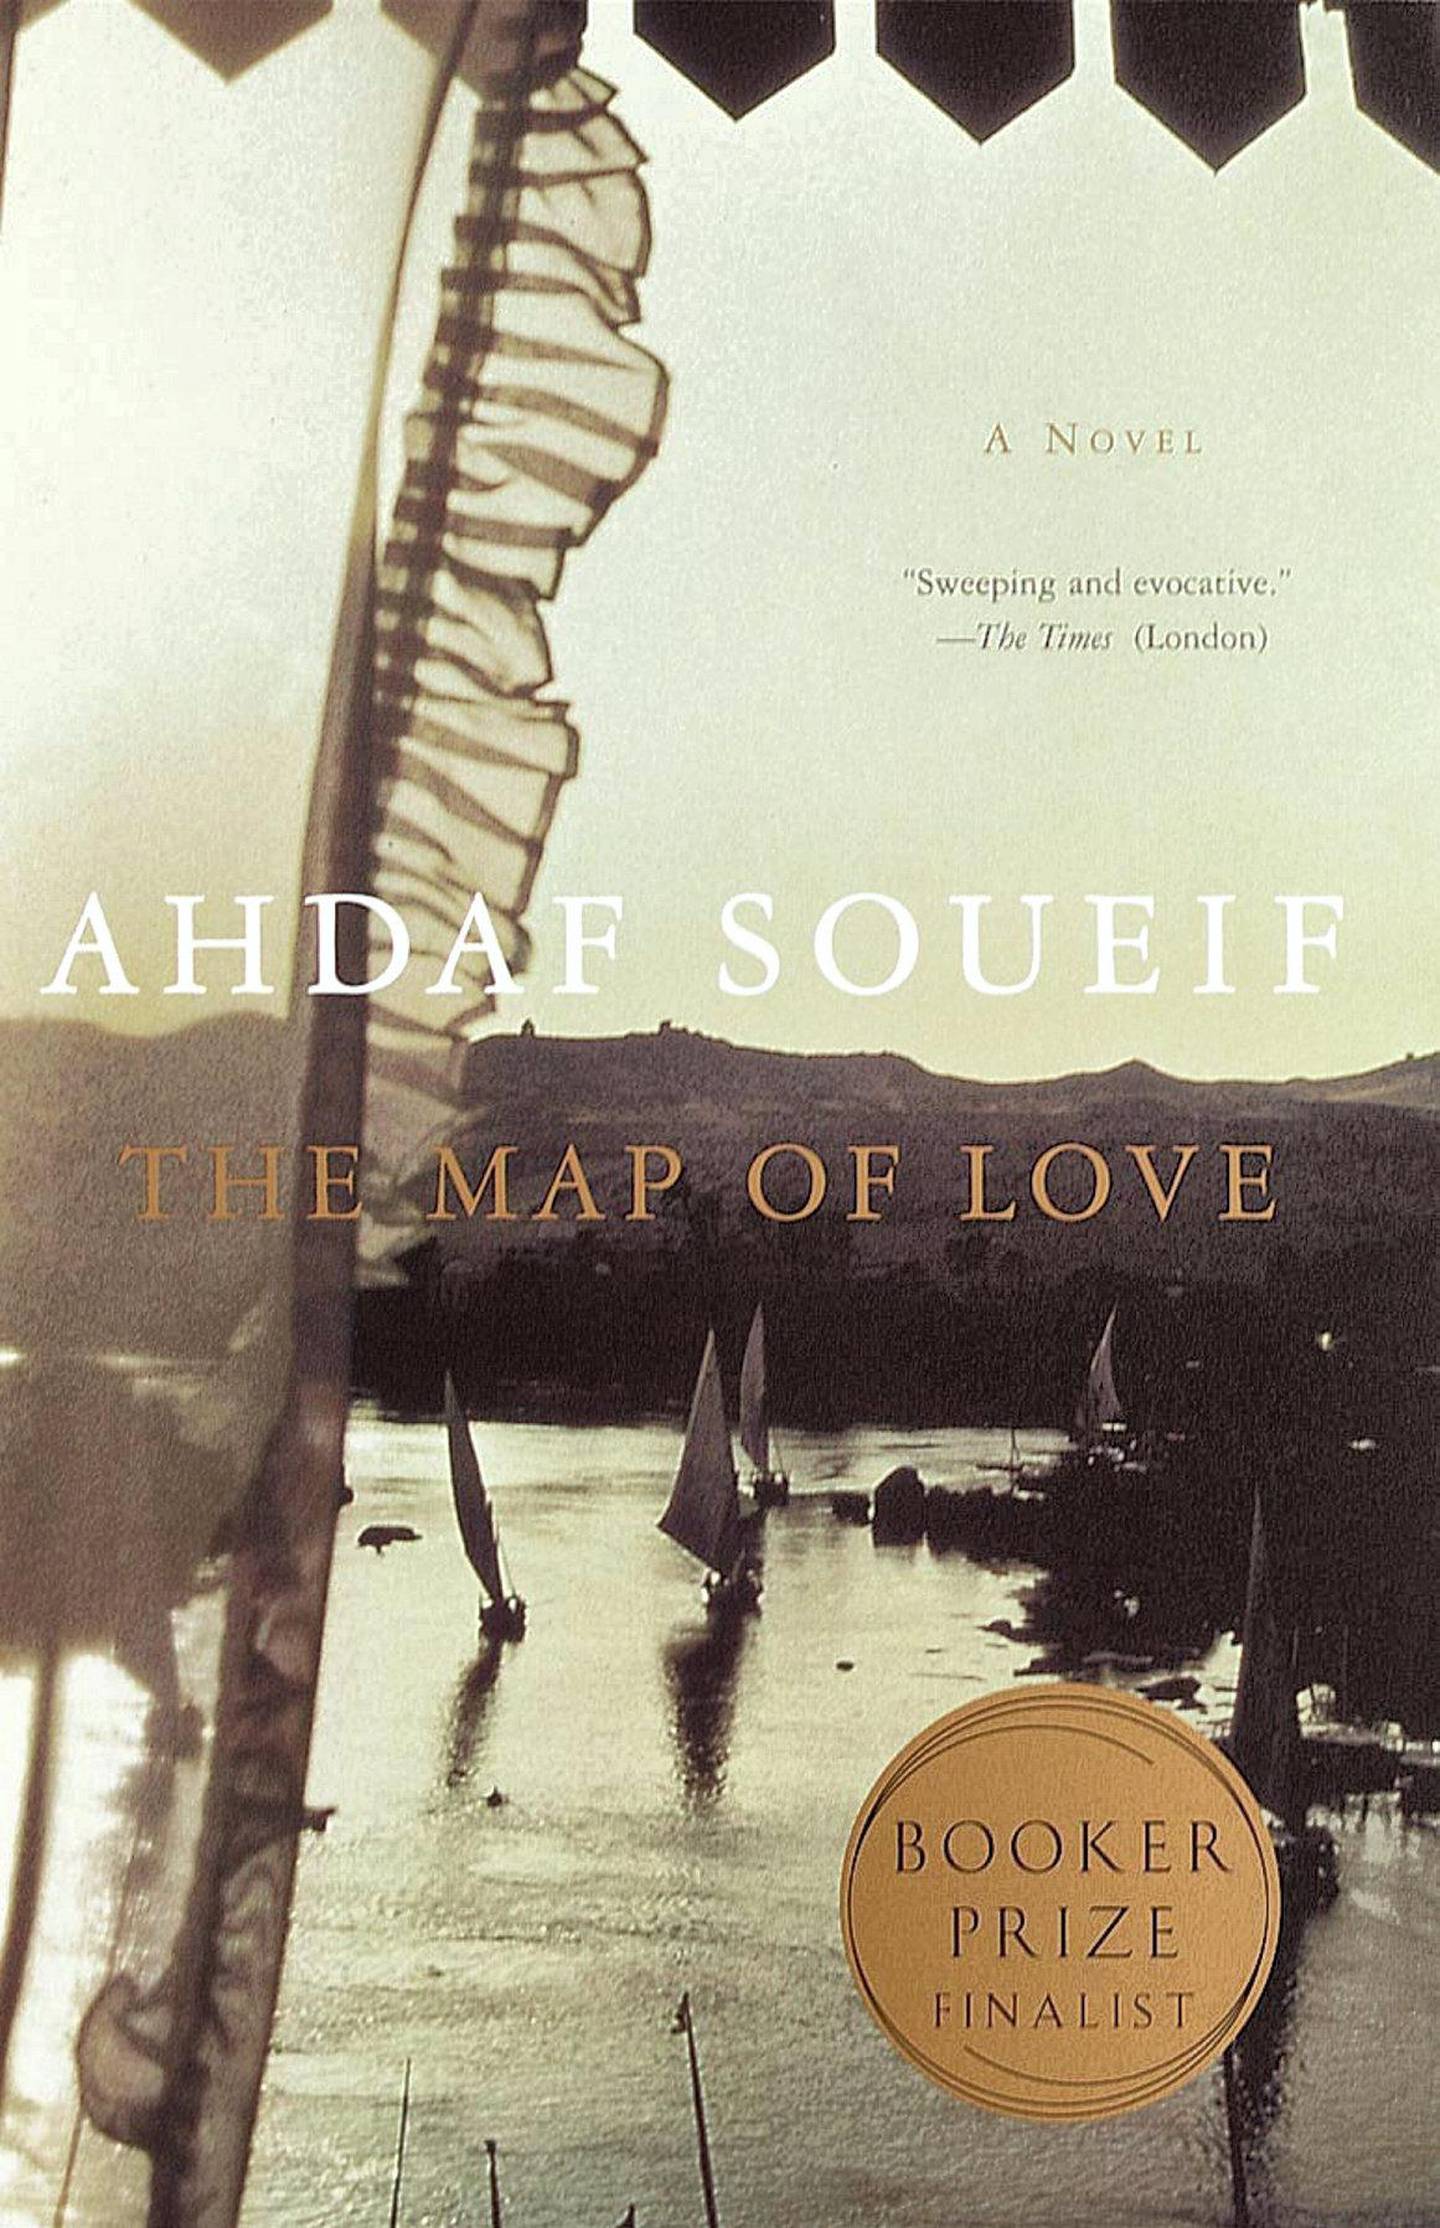 The Map of Love: A Novel by Ahdaf Soueif published by Anchor. Courtesy Penguin Random House